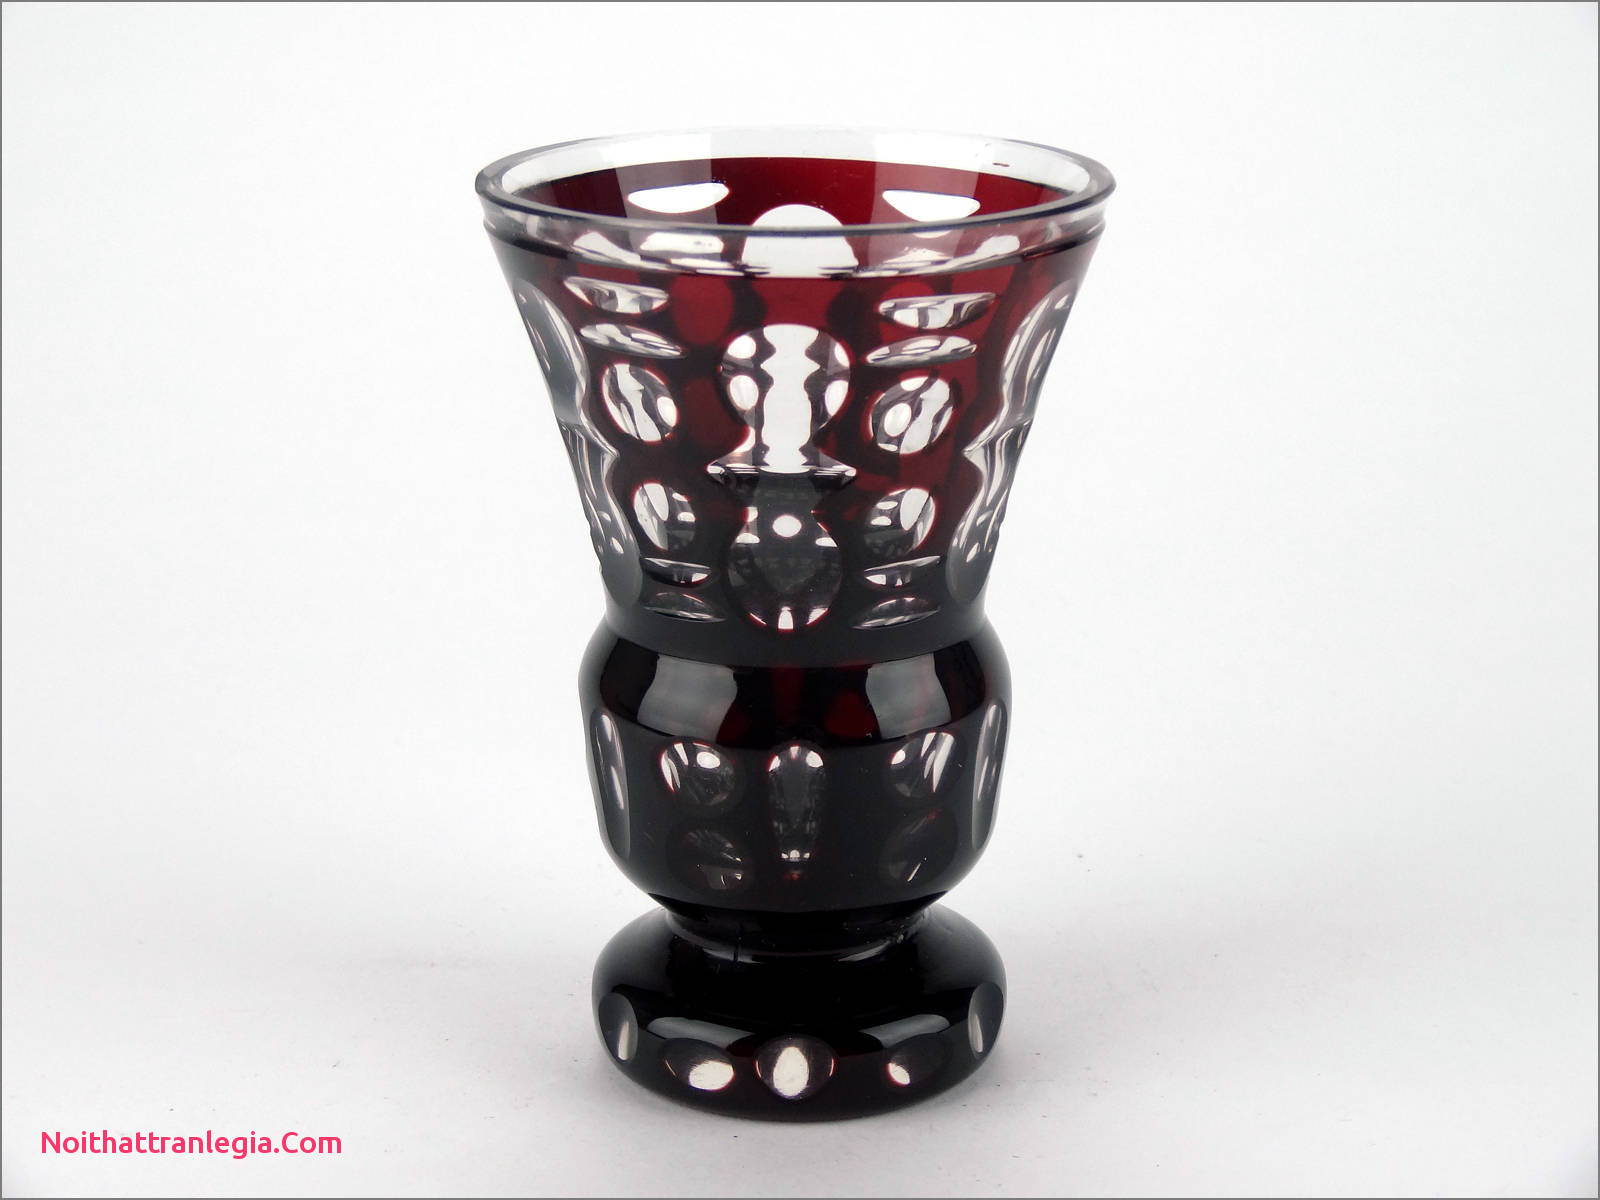 small crystal vase of 20 cut glass antique vase noithattranlegia vases design in antique c1910 bohemian cut to clear red glass vase czech ruby red cut glass goblet